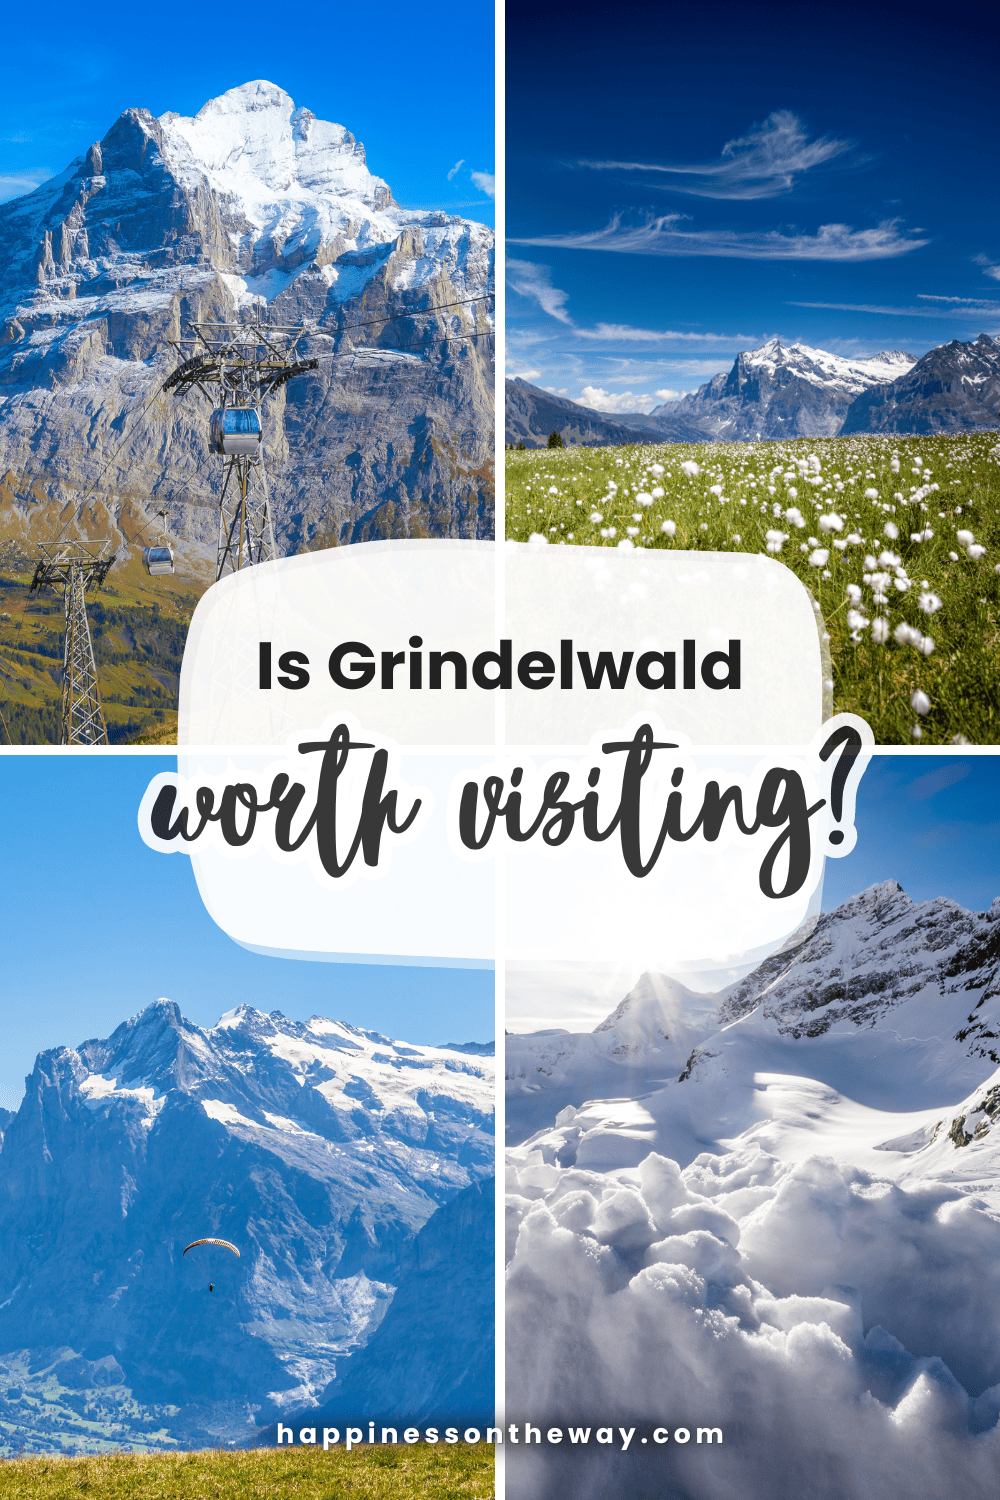 Collage of Grindelwald's stunning landscapes featuring the iconic Eiger mountain, a cable car, a paraglider, and snowy vistas.